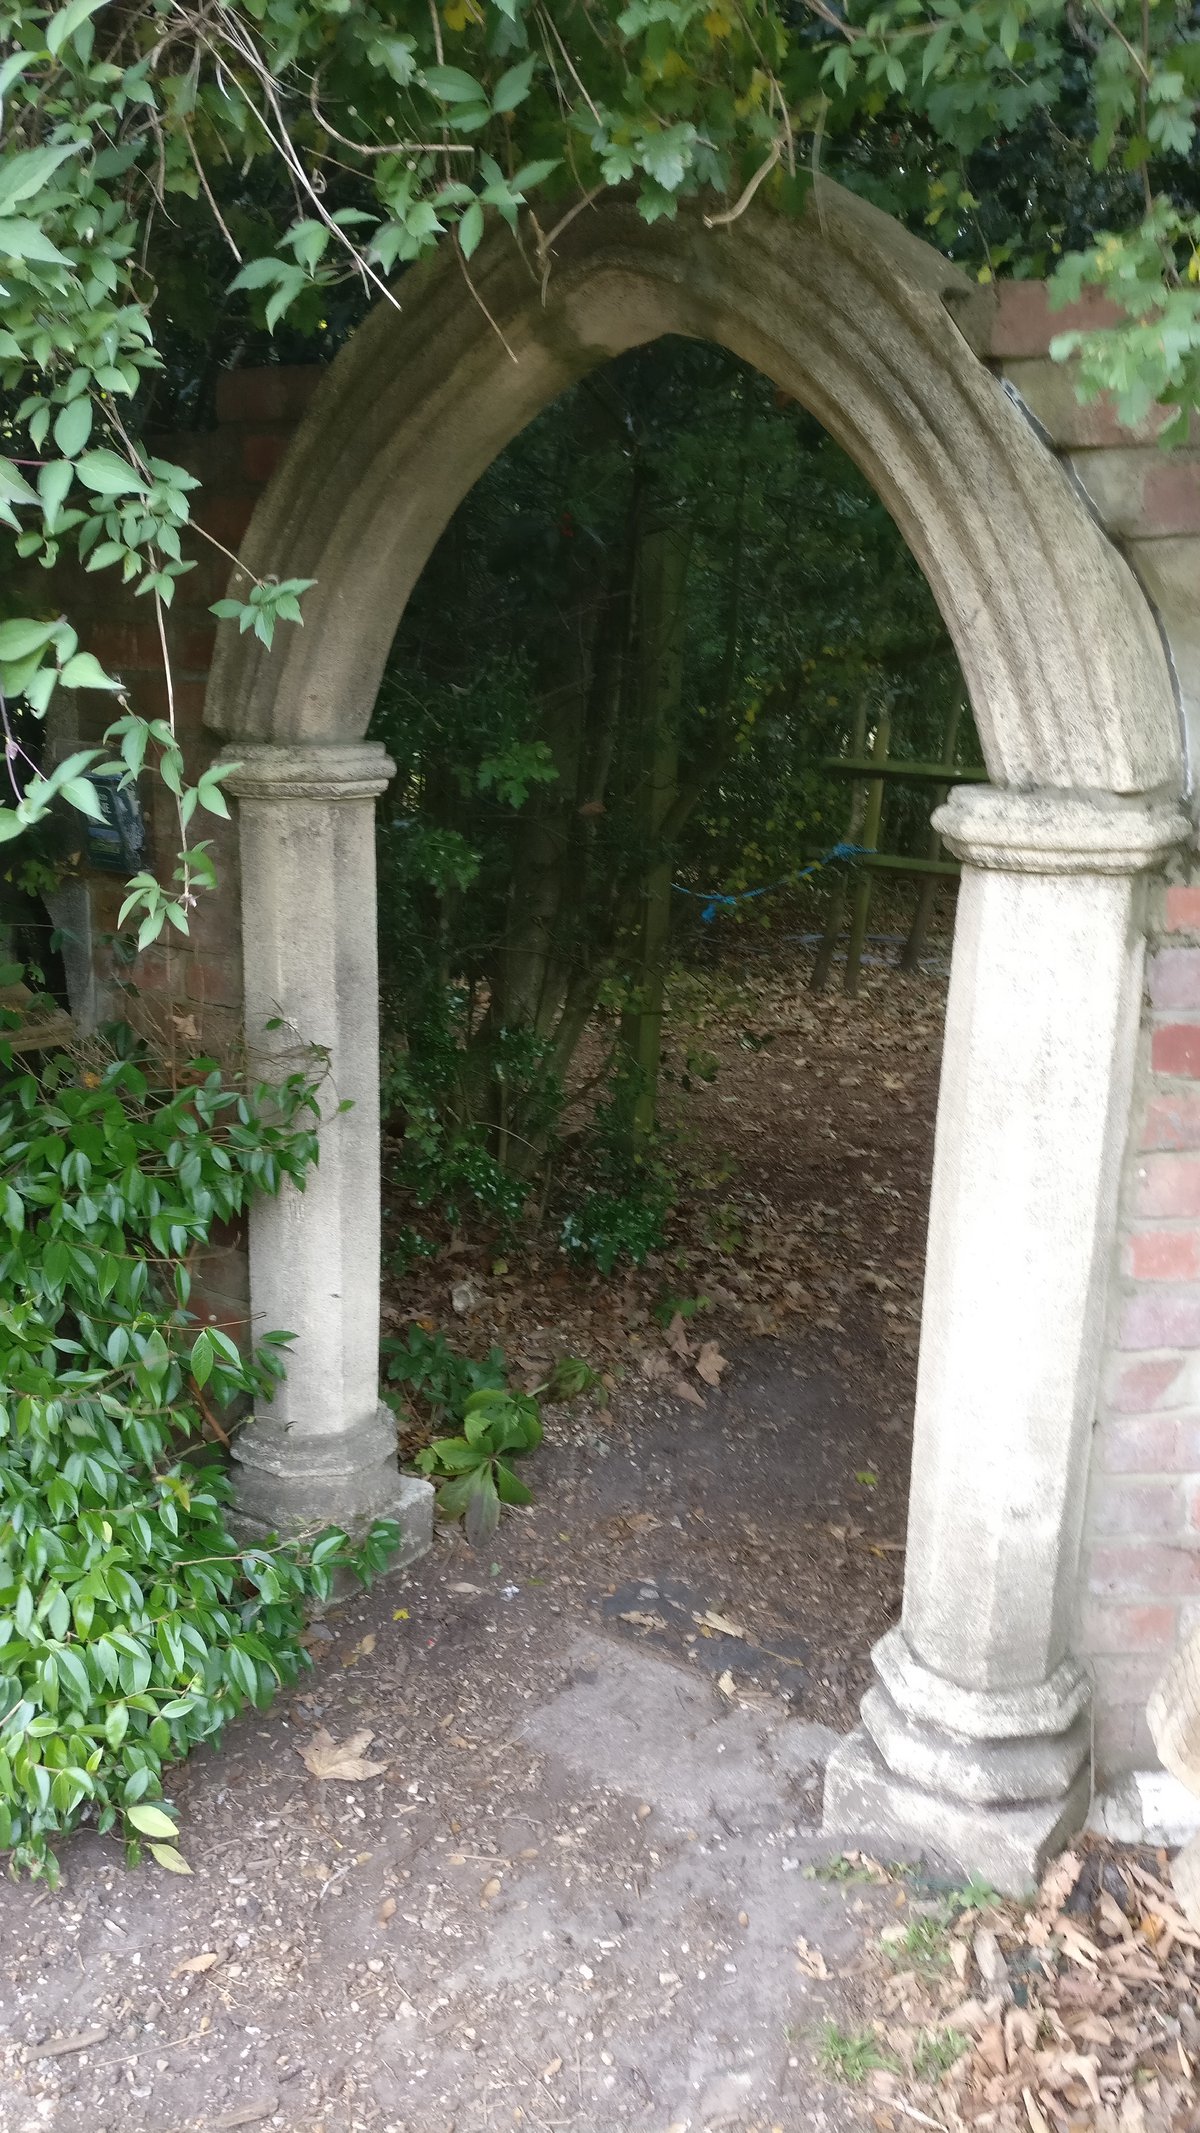 An archway